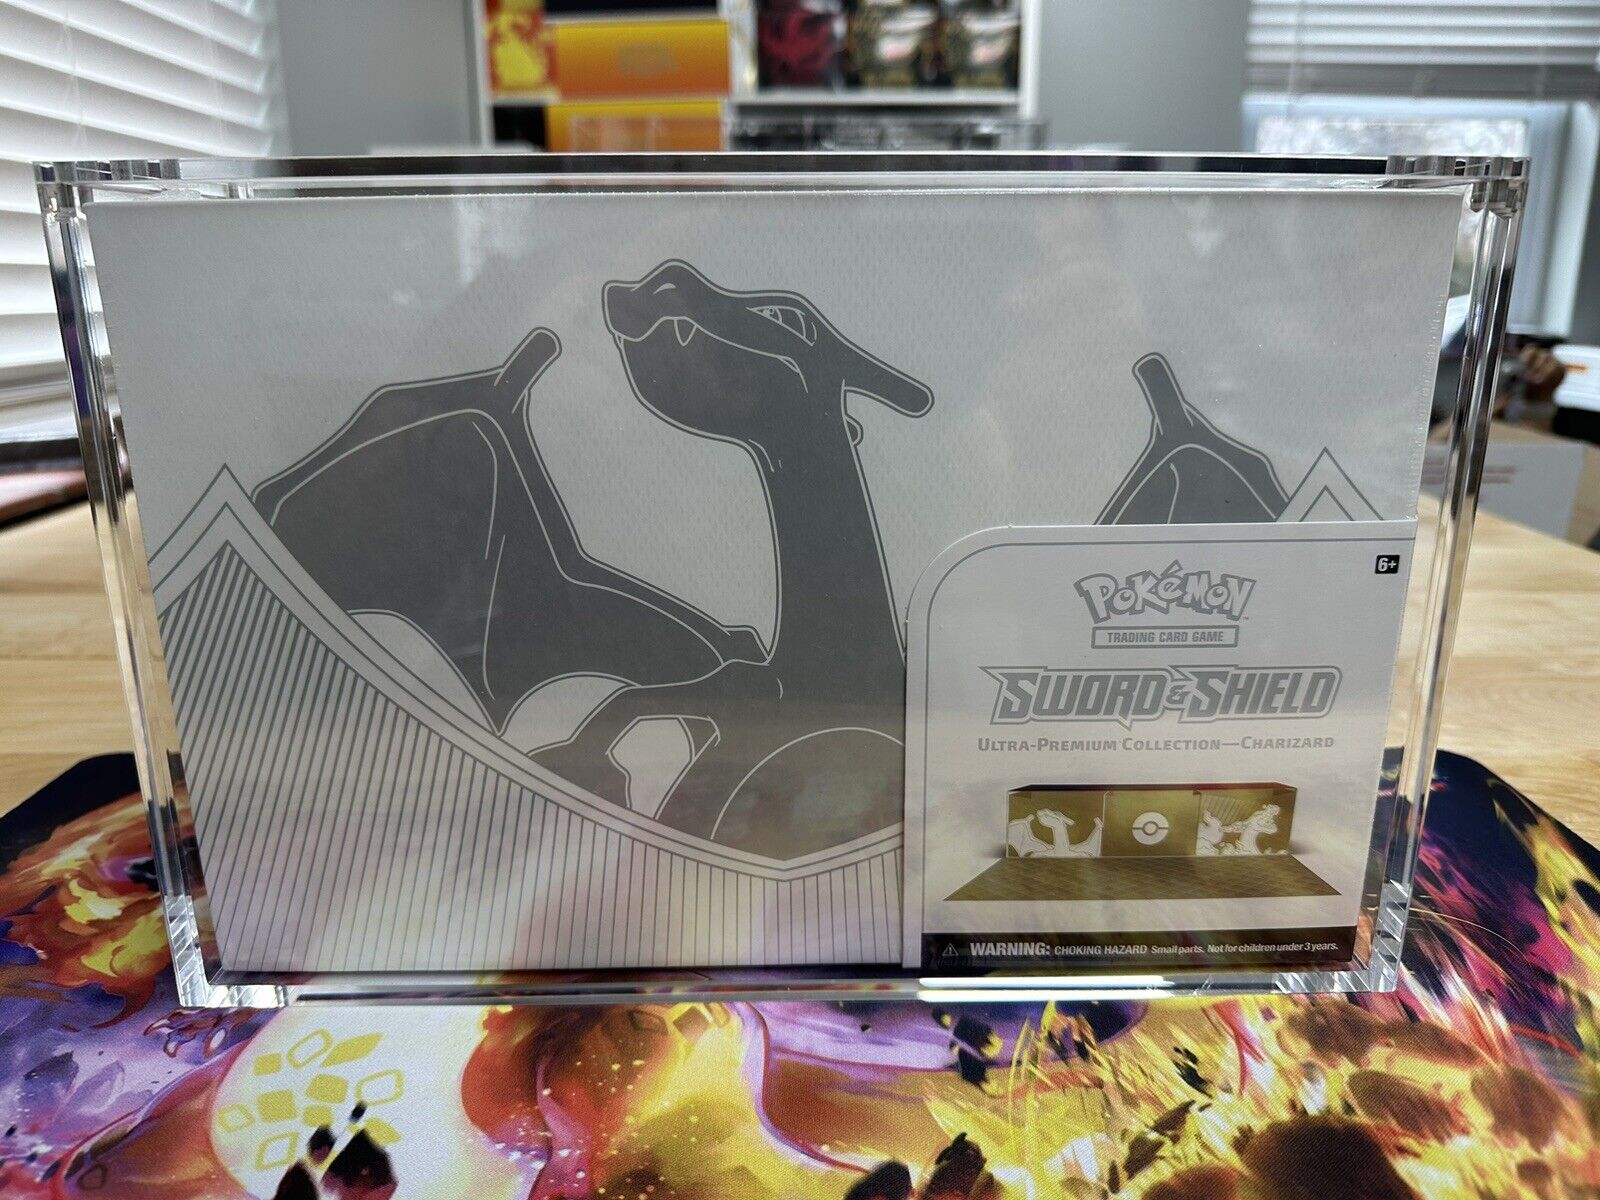 Acrylic Display Case For Sword & Shield Charizard Upc With Strong Magnetic Lid!